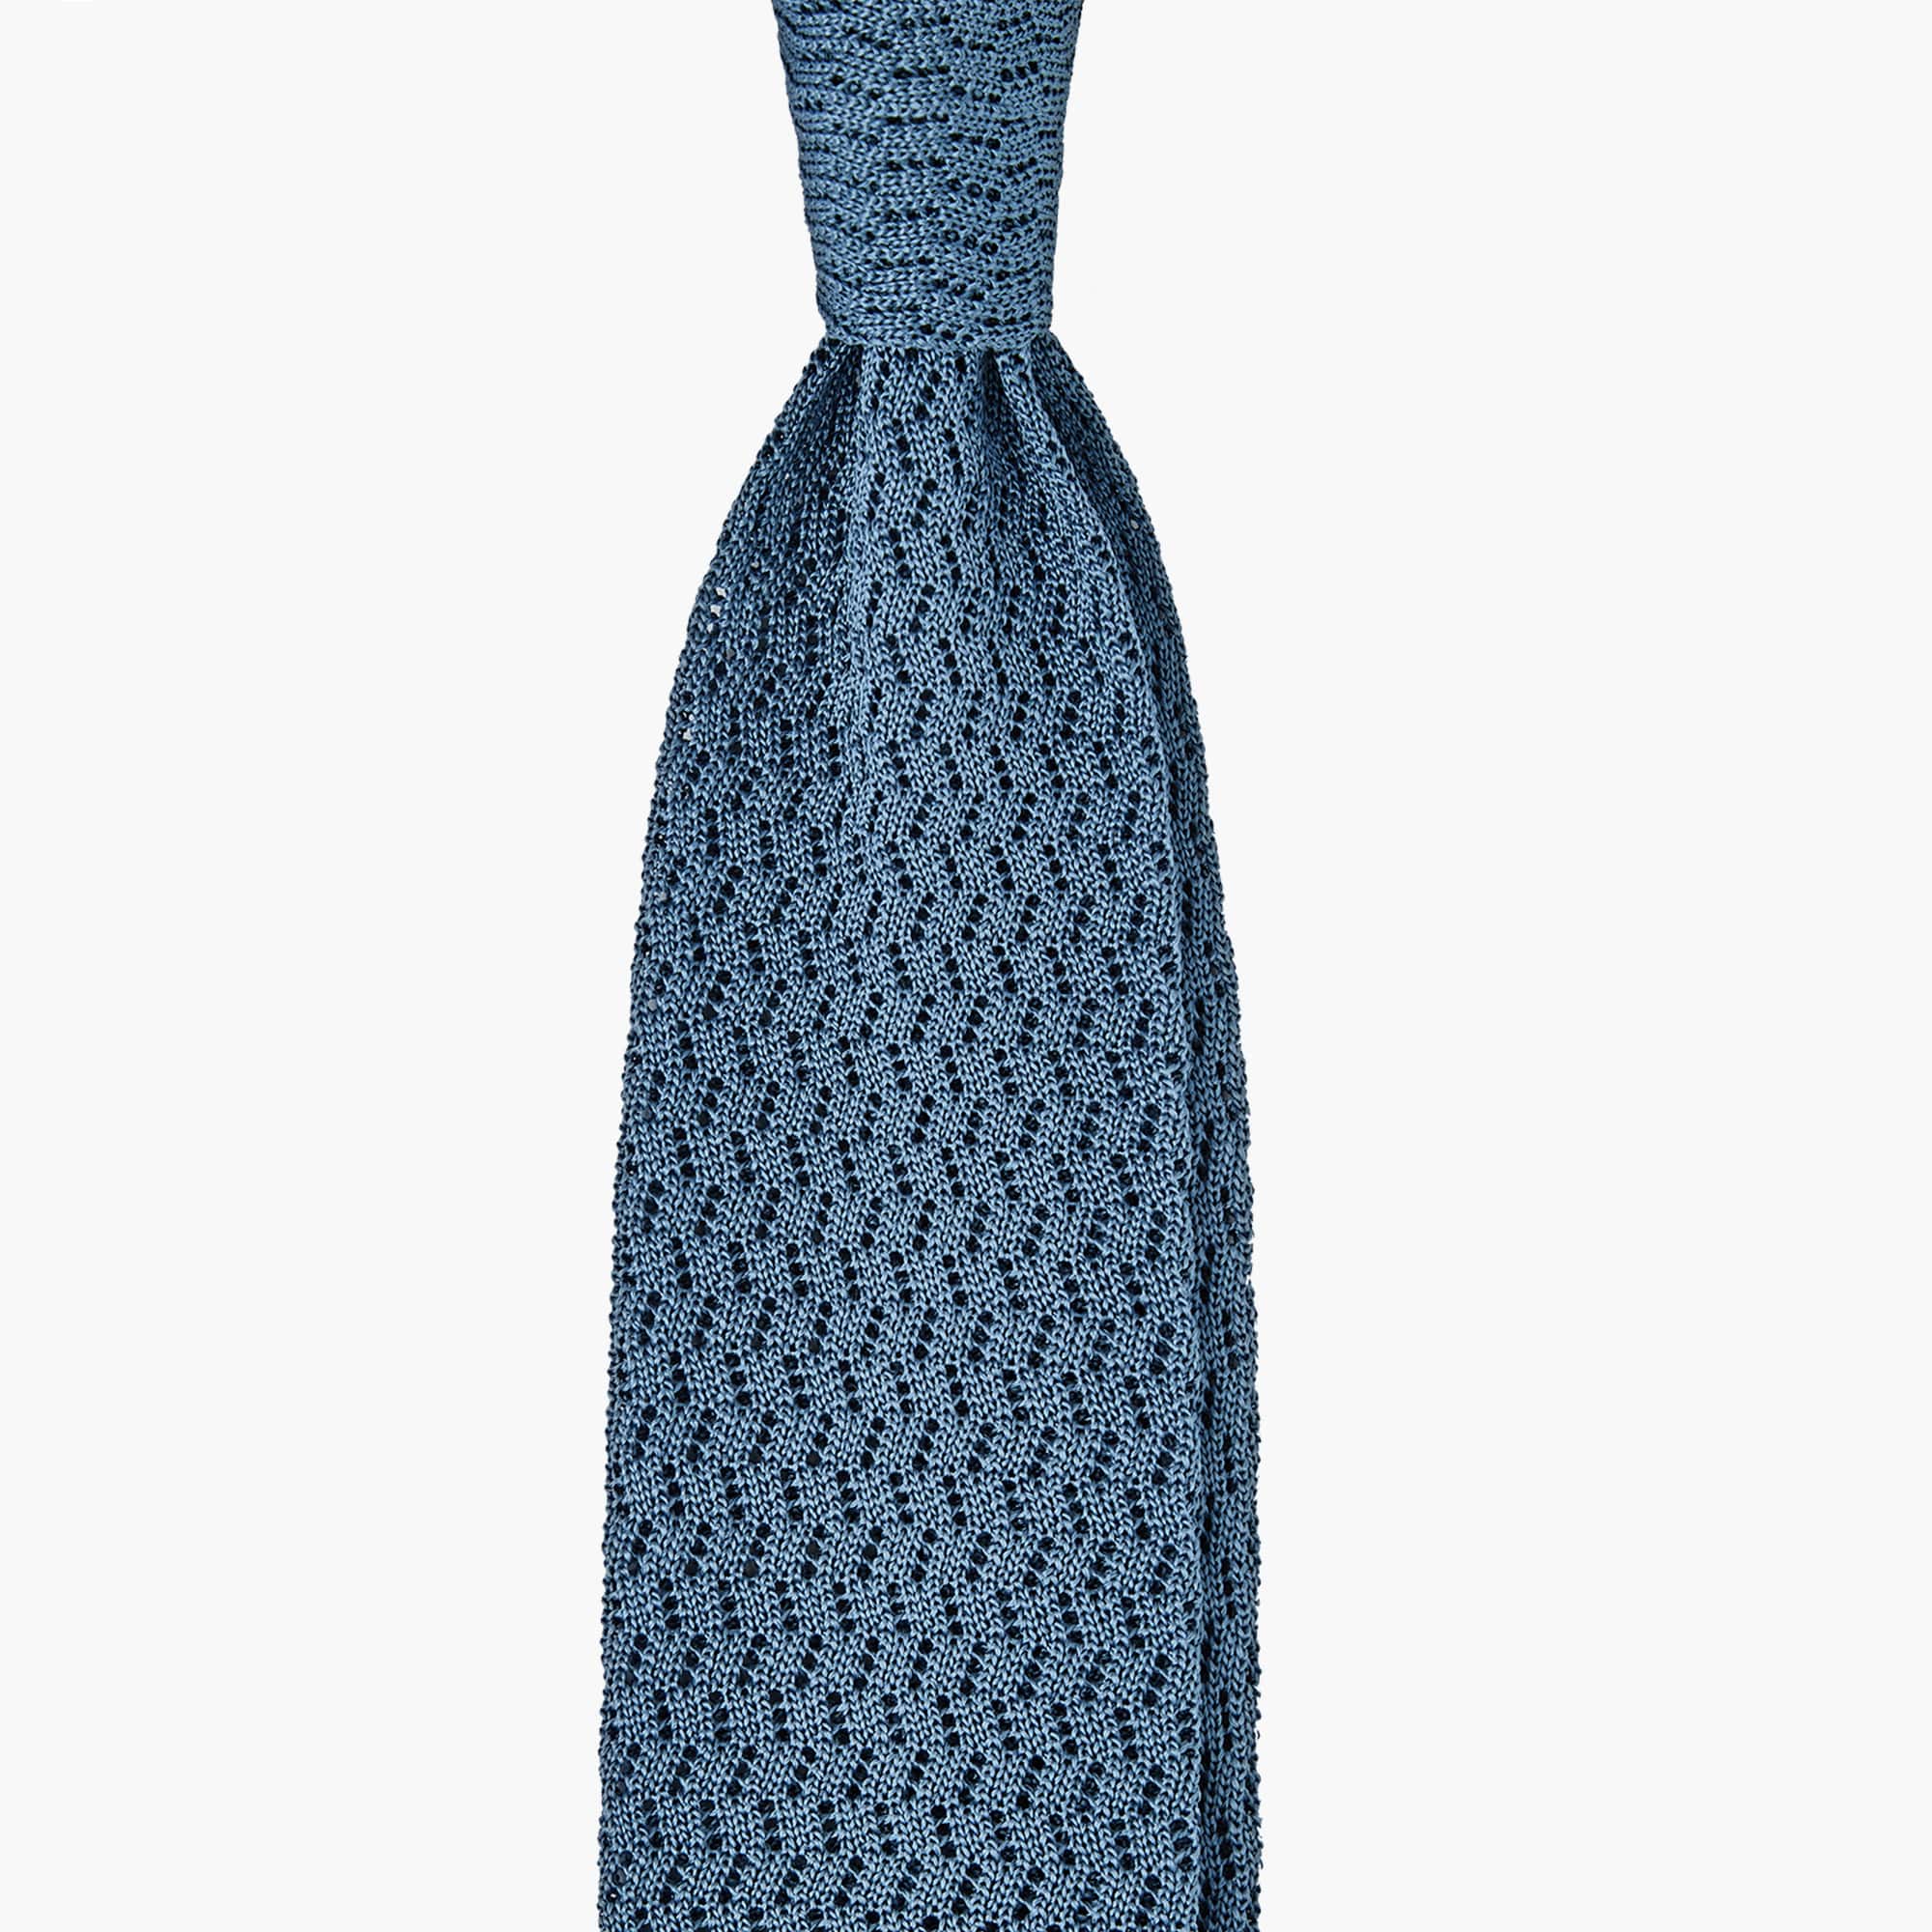 Knitted Solid ZigZag Tie - Sea Blue